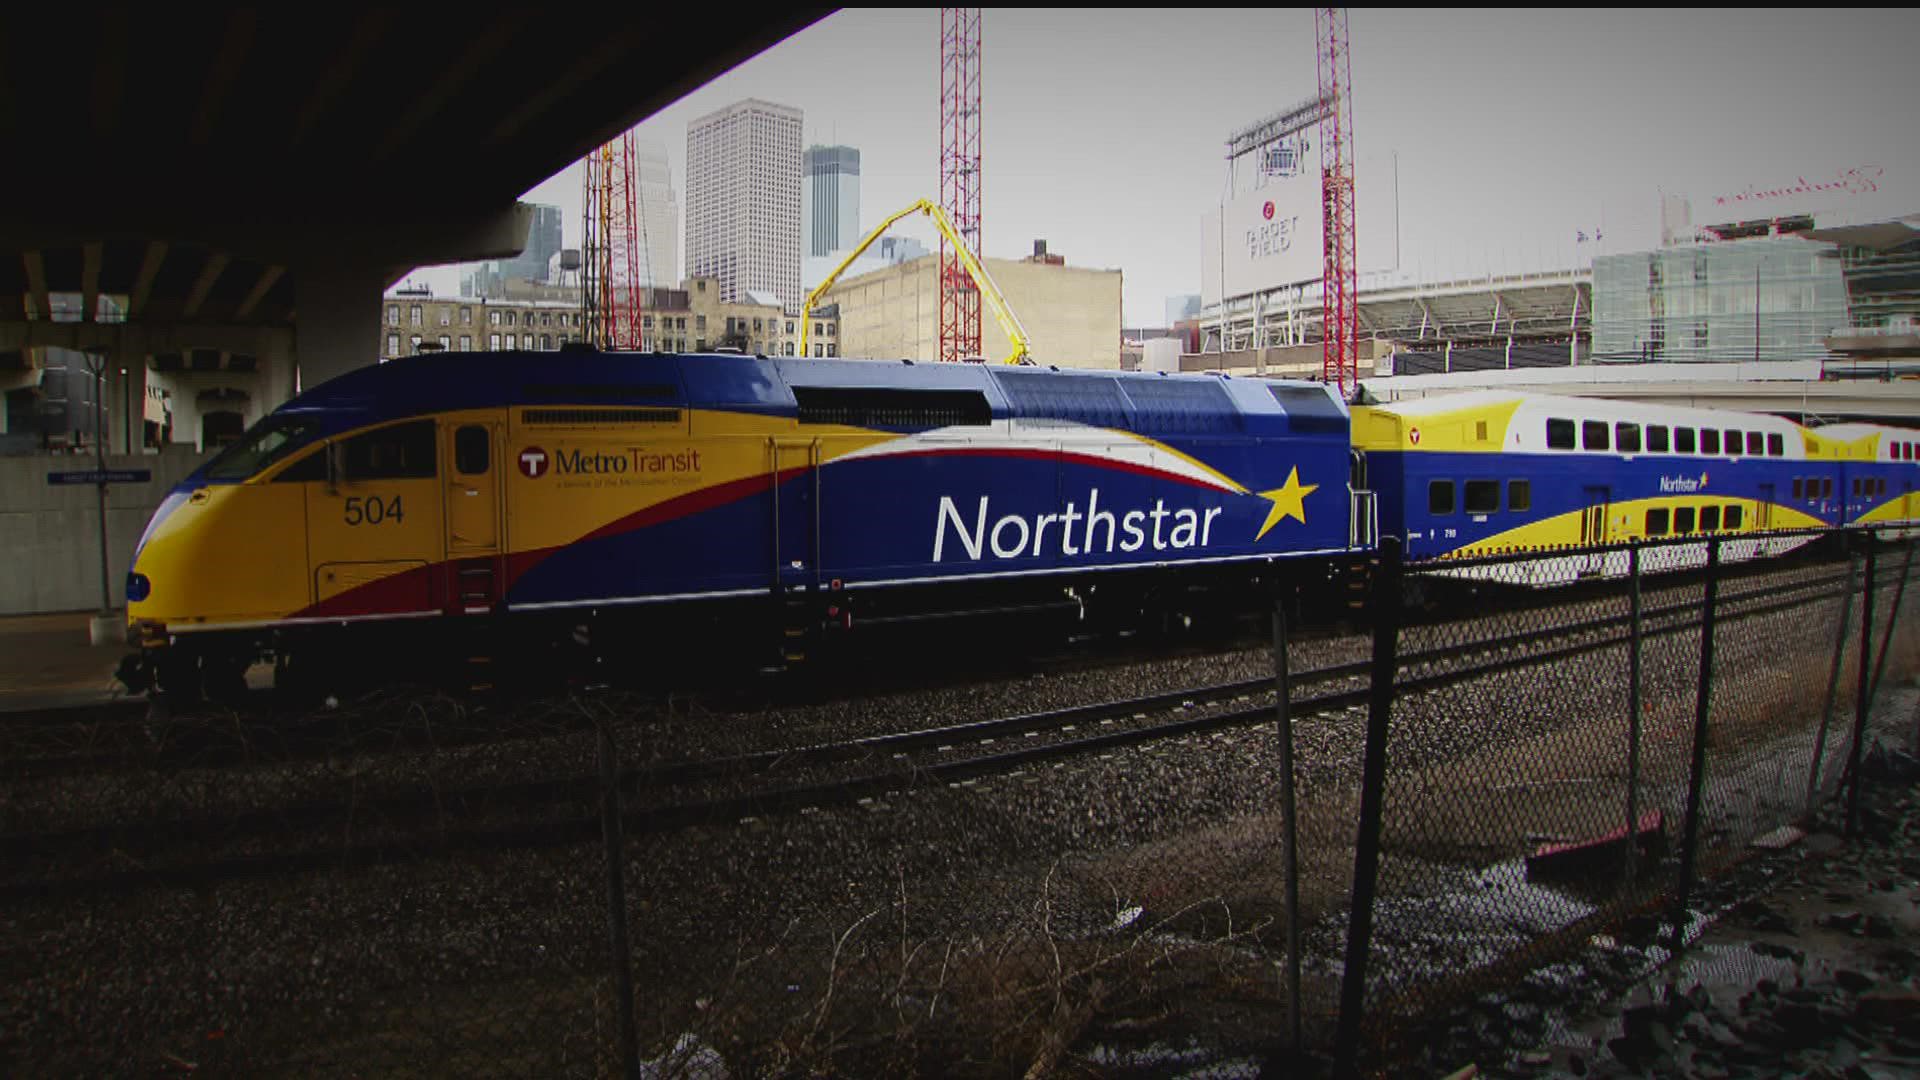 The Northstar line currently has trains running into Minneapolis from Big Lake, Fridley, Coon Rapids-Riverdale, Anoka and Ramsey Stations.